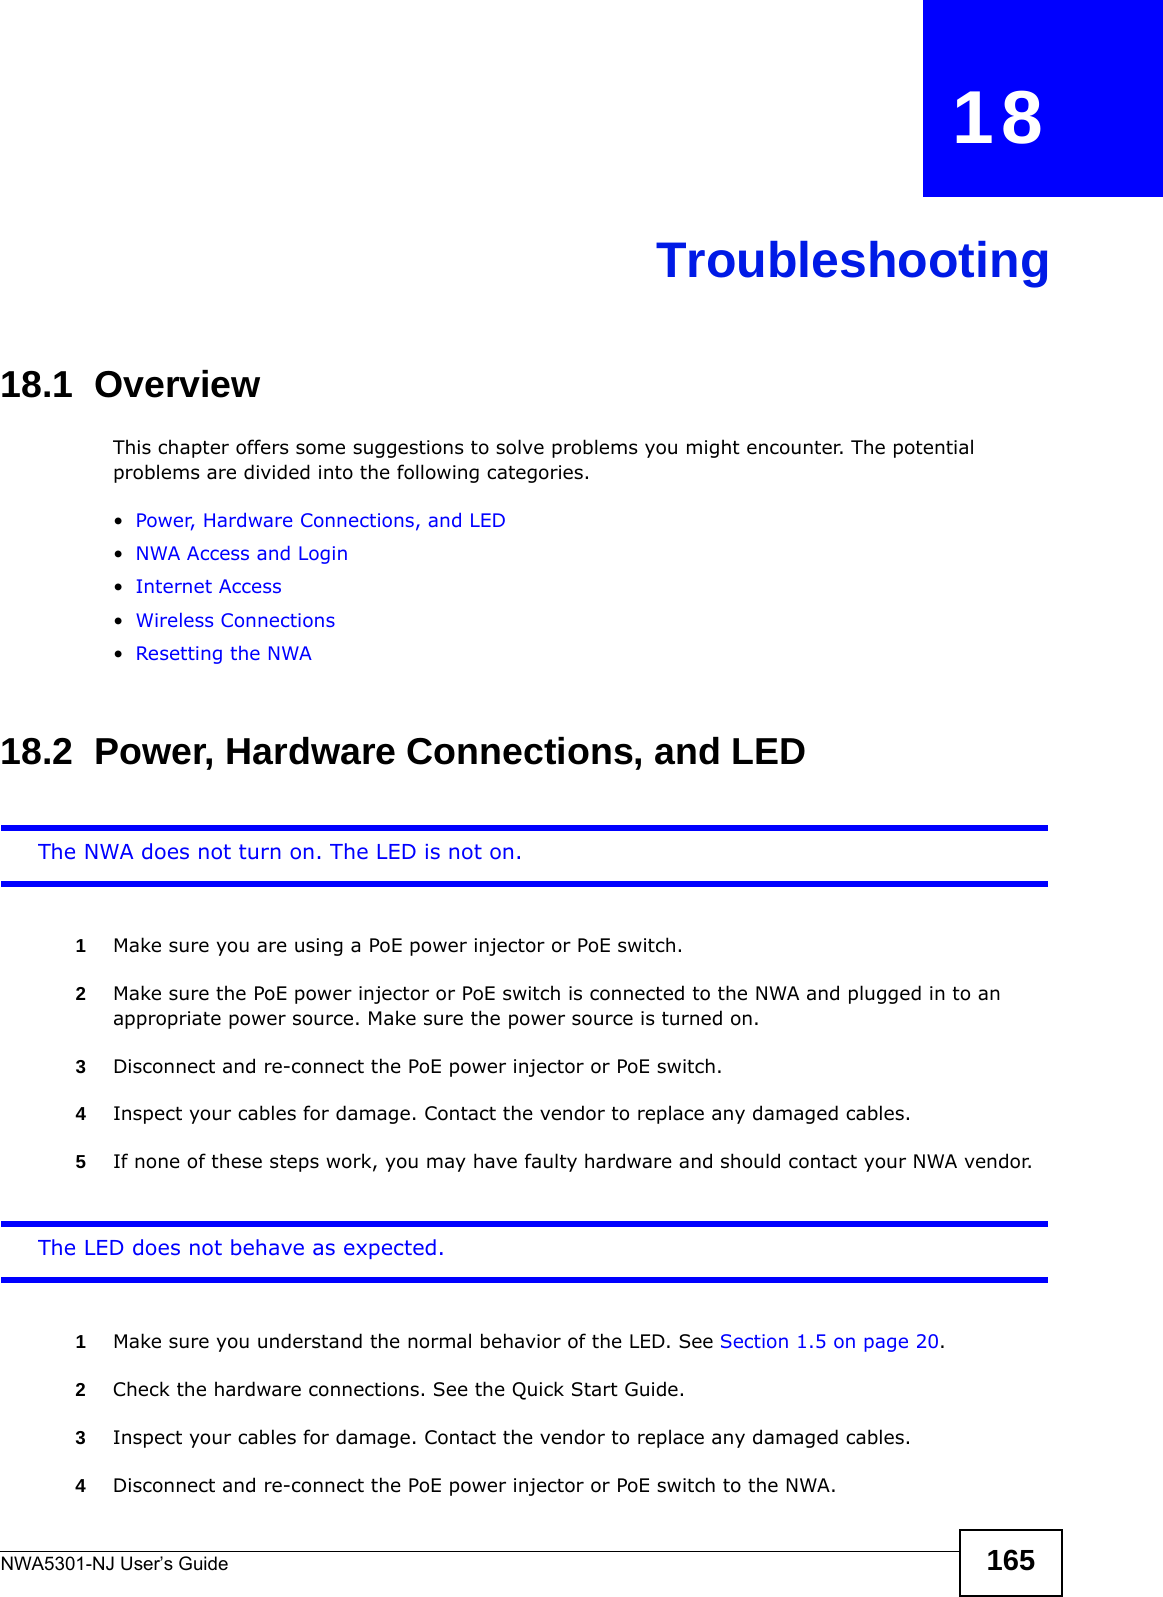 NWA5301-NJ User’s Guide 165CHAPTER   18Troubleshooting18.1  OverviewThis chapter offers some suggestions to solve problems you might encounter. The potential problems are divided into the following categories.•Power, Hardware Connections, and LED•NWA Access and Login•Internet Access•Wireless Connections•Resetting the NWA18.2  Power, Hardware Connections, and LEDThe NWA does not turn on. The LED is not on.1Make sure you are using a PoE power injector or PoE switch.2Make sure the PoE power injector or PoE switch is connected to the NWA and plugged in to an appropriate power source. Make sure the power source is turned on.3Disconnect and re-connect the PoE power injector or PoE switch.4Inspect your cables for damage. Contact the vendor to replace any damaged cables.5If none of these steps work, you may have faulty hardware and should contact your NWA vendor. The LED does not behave as expected.1Make sure you understand the normal behavior of the LED. See Section 1.5 on page 20.2Check the hardware connections. See the Quick Start Guide.3Inspect your cables for damage. Contact the vendor to replace any damaged cables.4Disconnect and re-connect the PoE power injector or PoE switch to the NWA. 